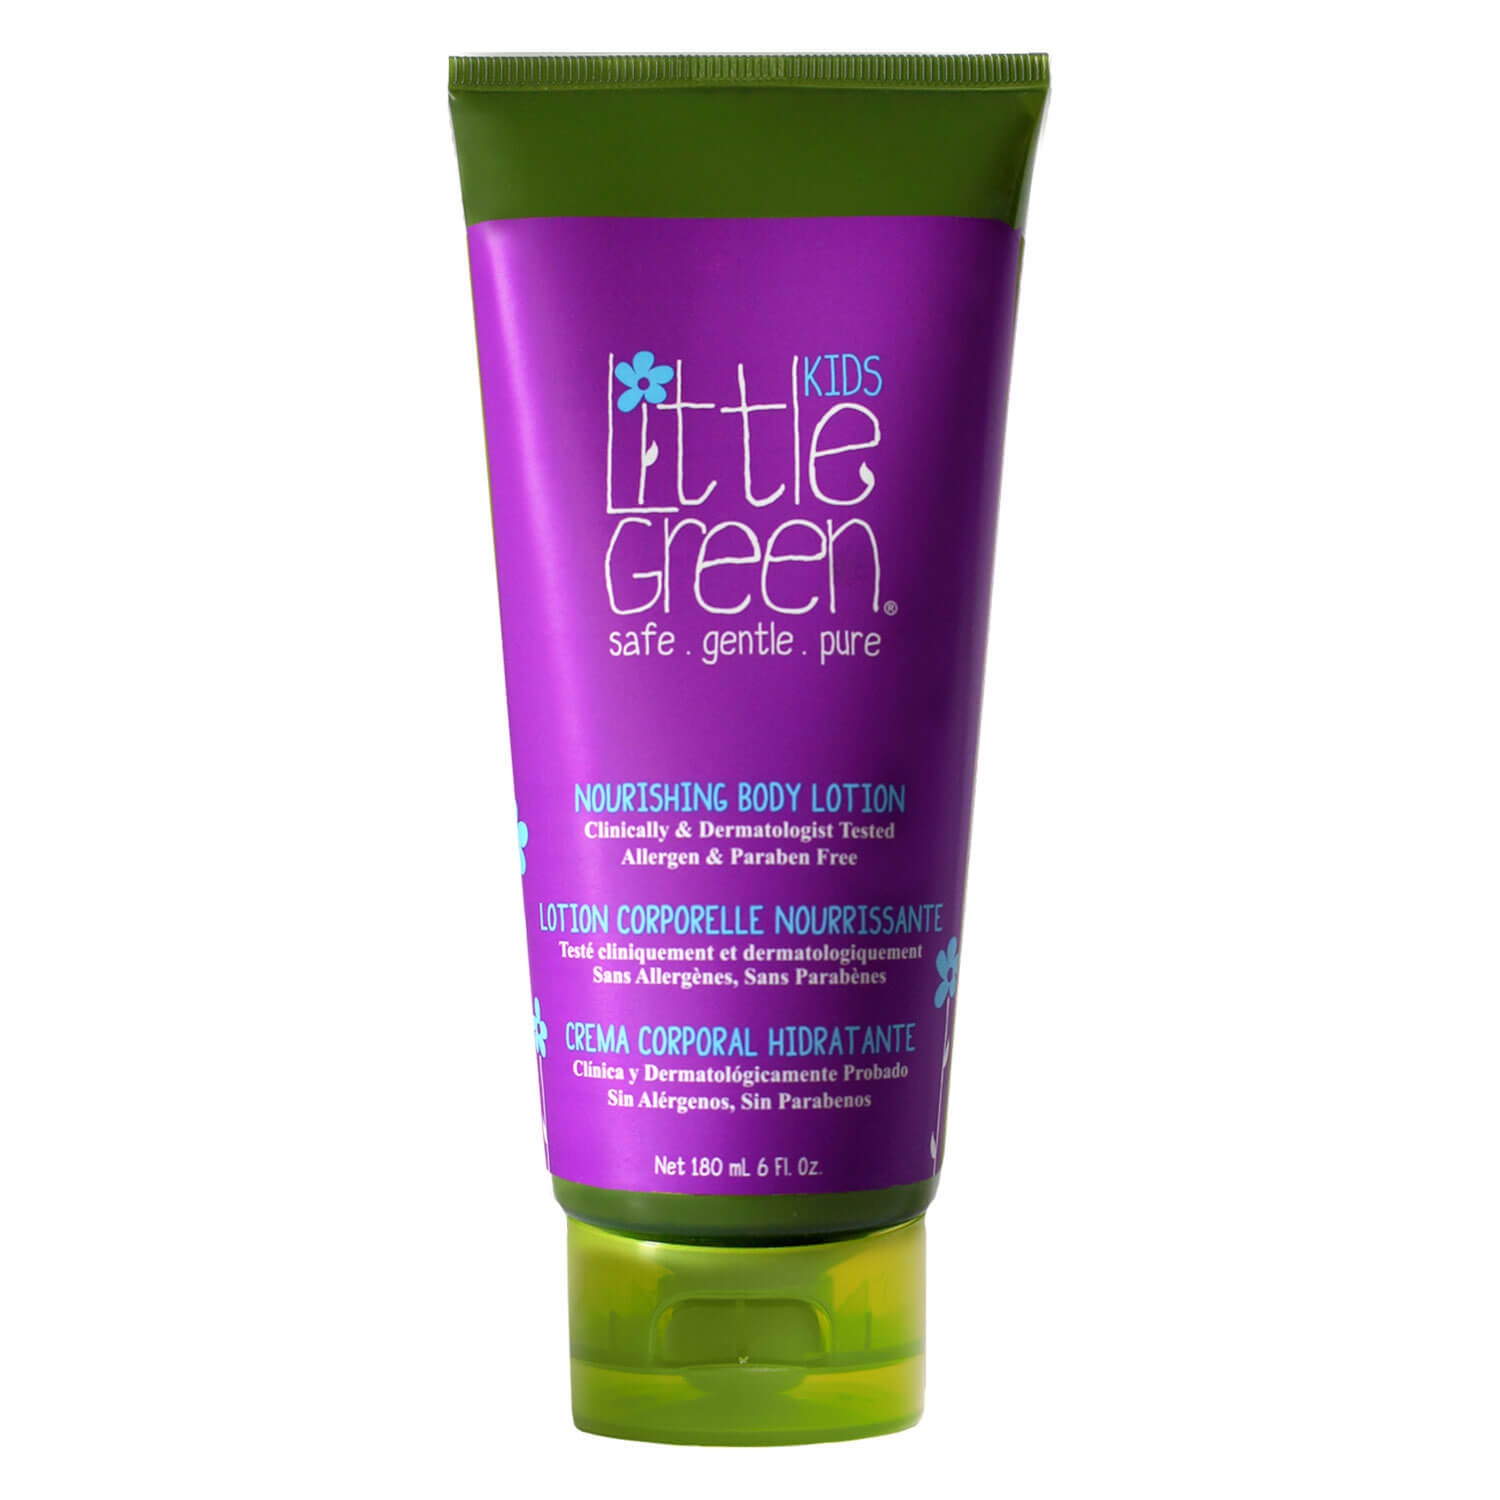 Product image from Little Green Kids - Nourishing Body Lotion